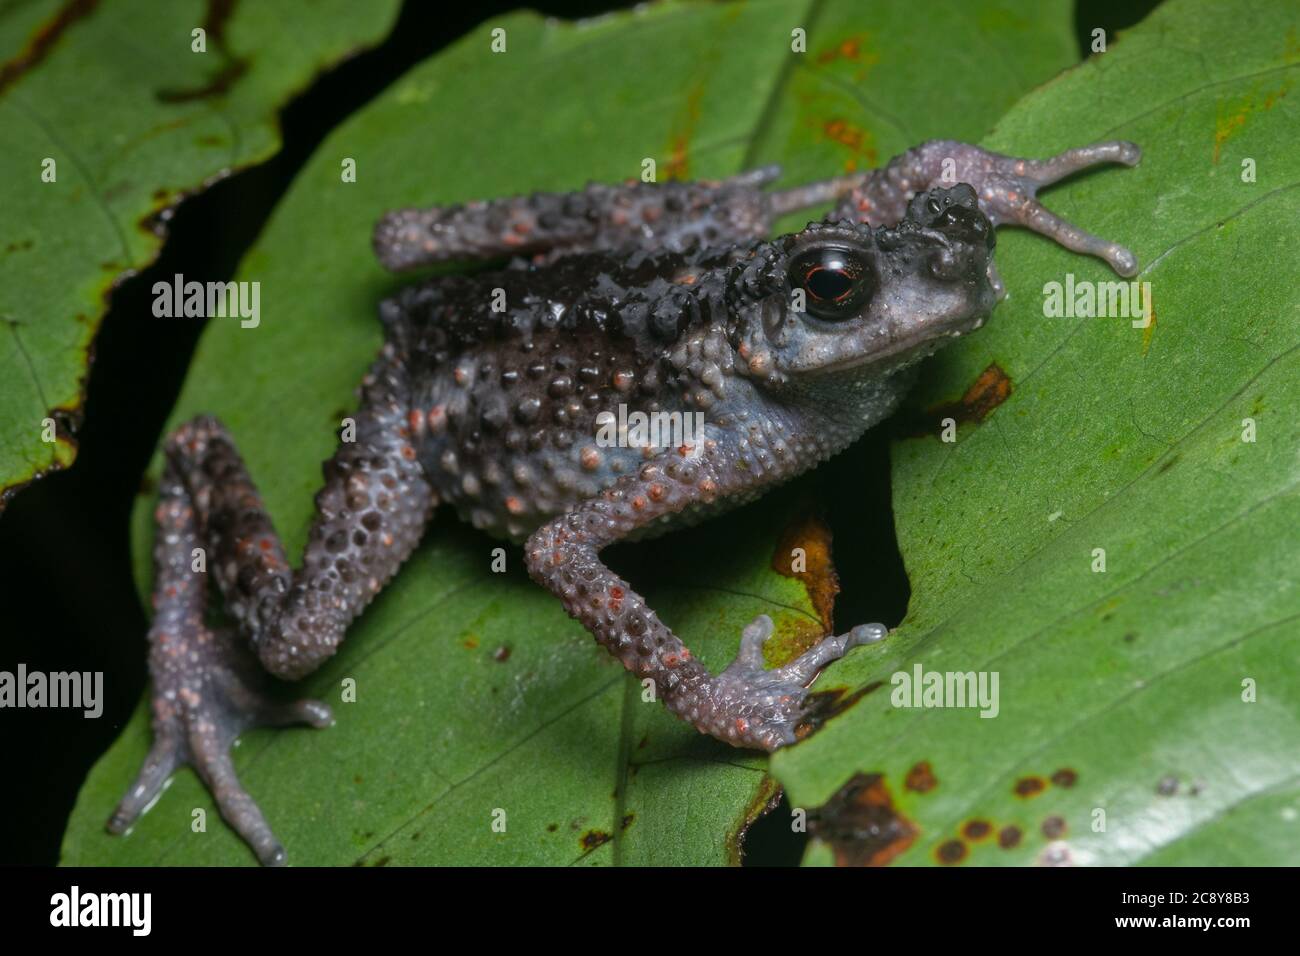 A spiny slender toad (Ansonia spinulifer), a toad endemic to the jungles of Borneo. Stock Photo